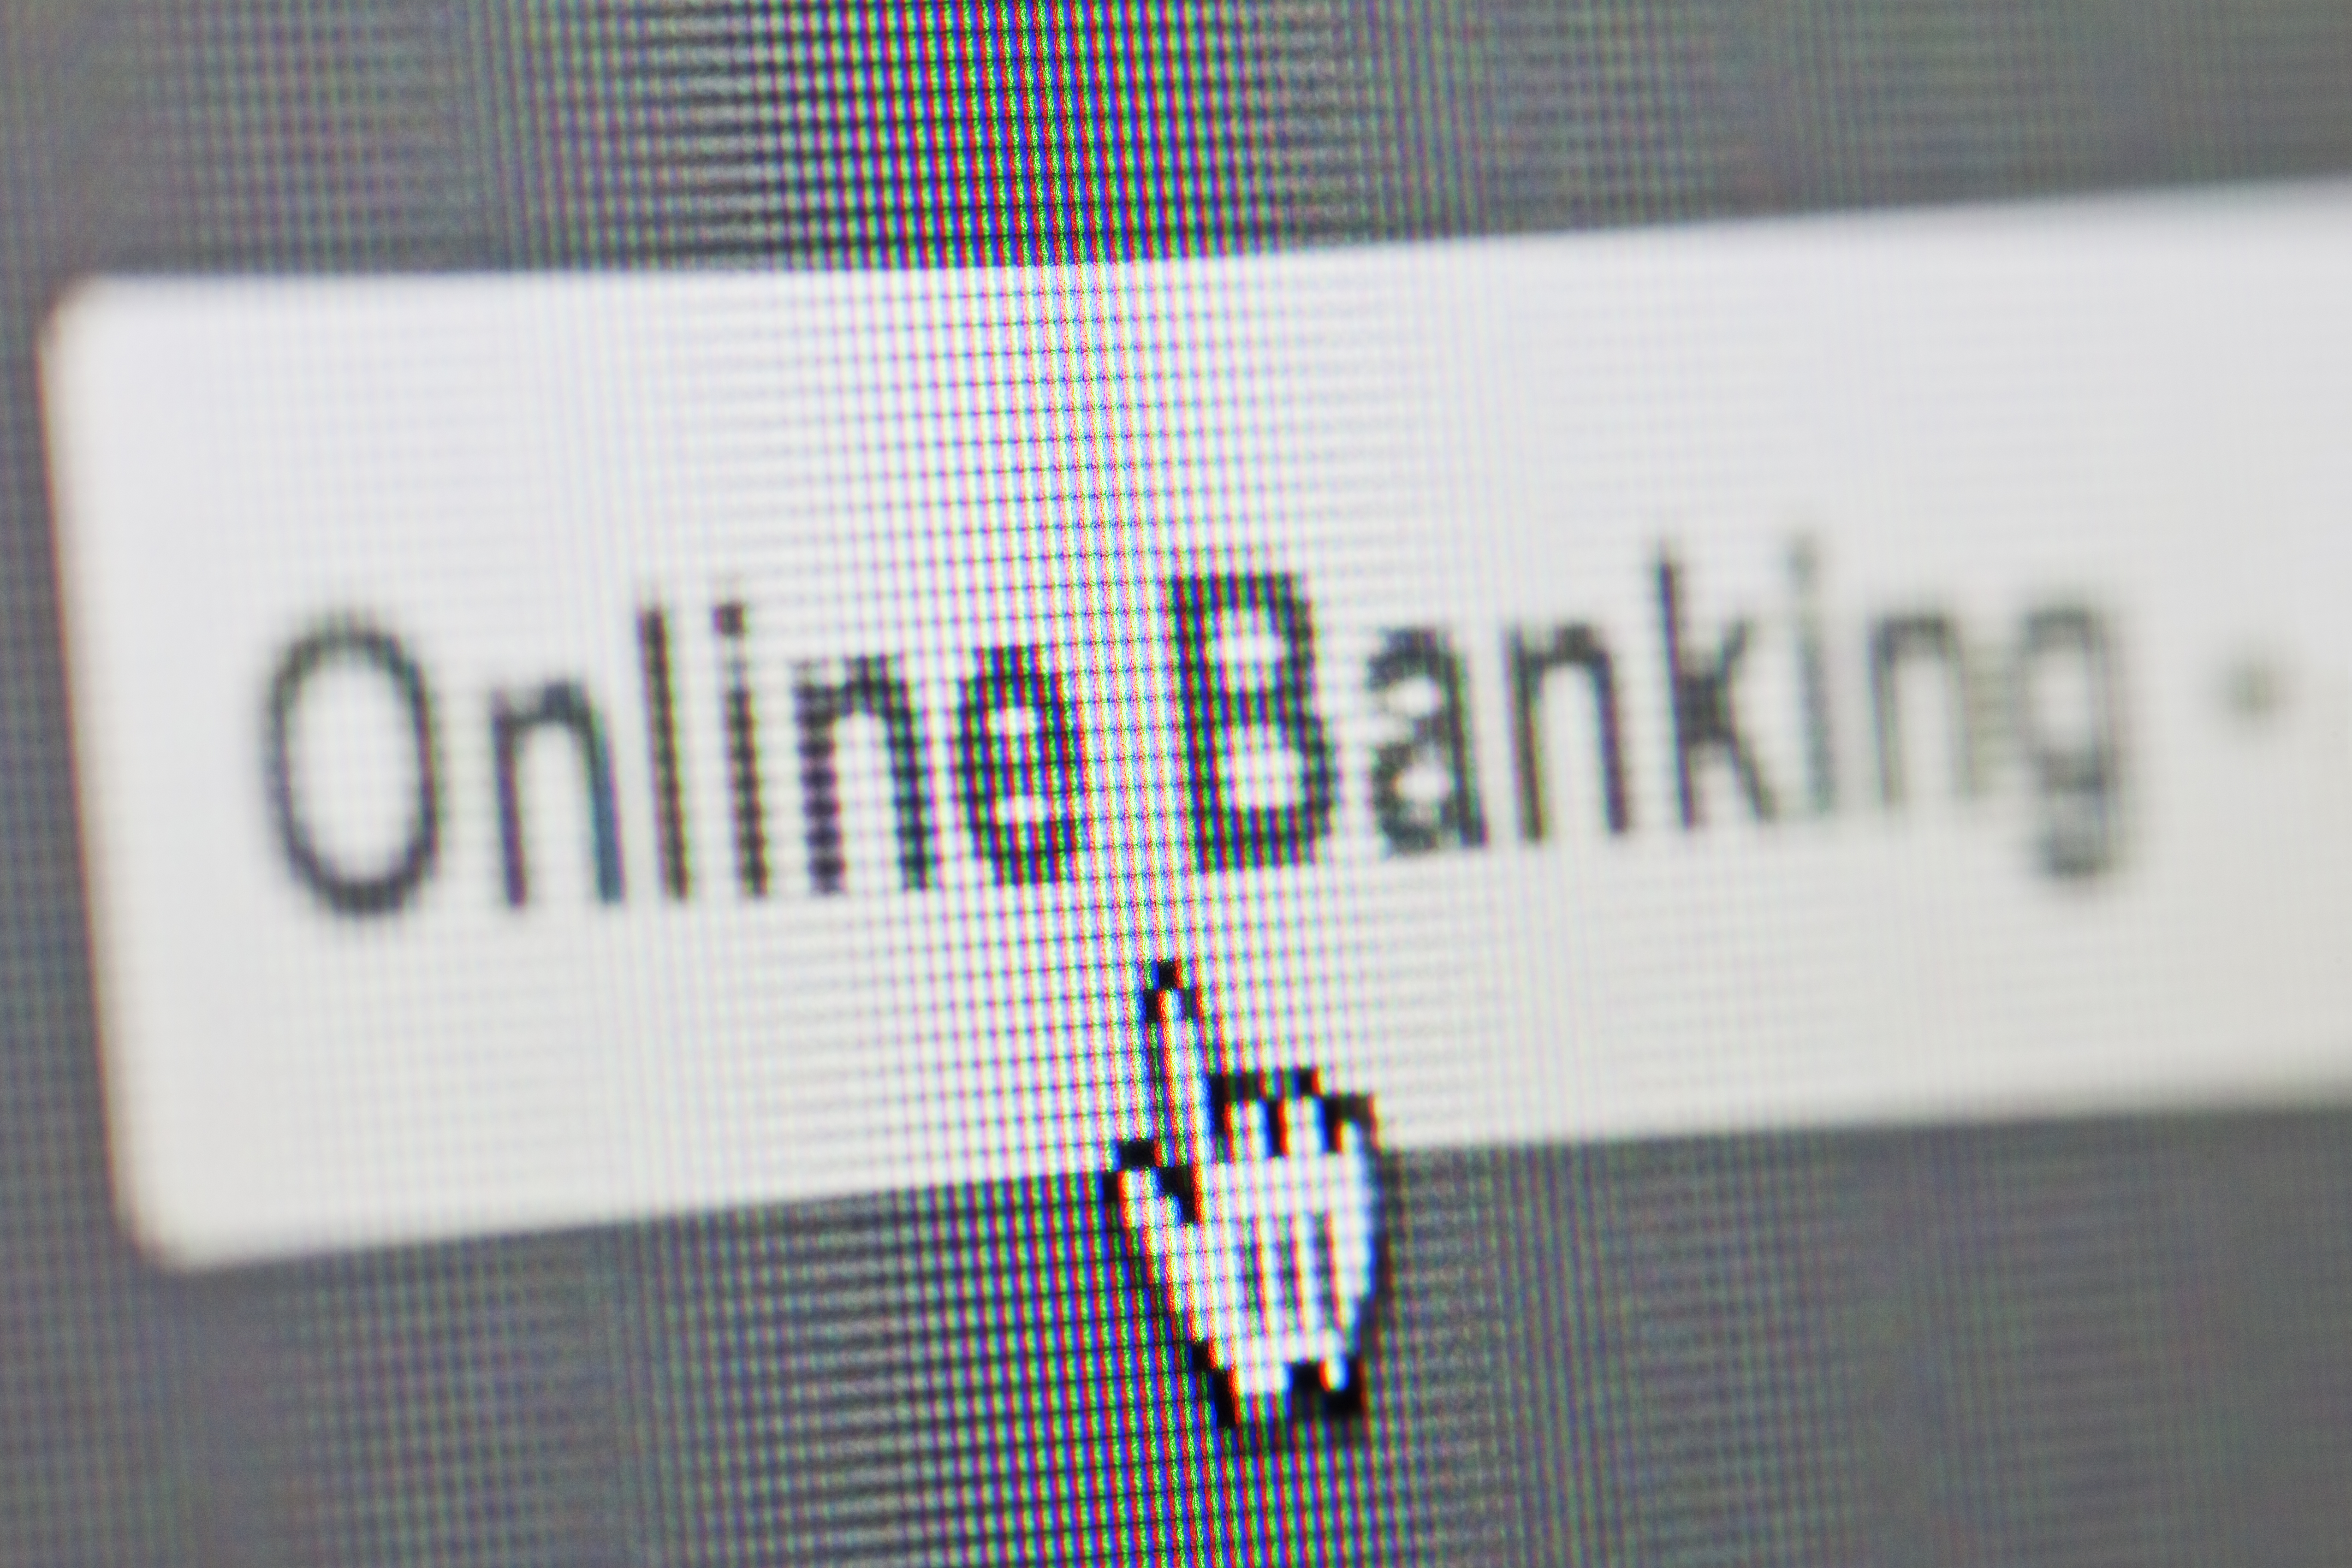 Ally, a Leader in Online Banking, Keeps Lowering Its Savings Rate. Here's Why